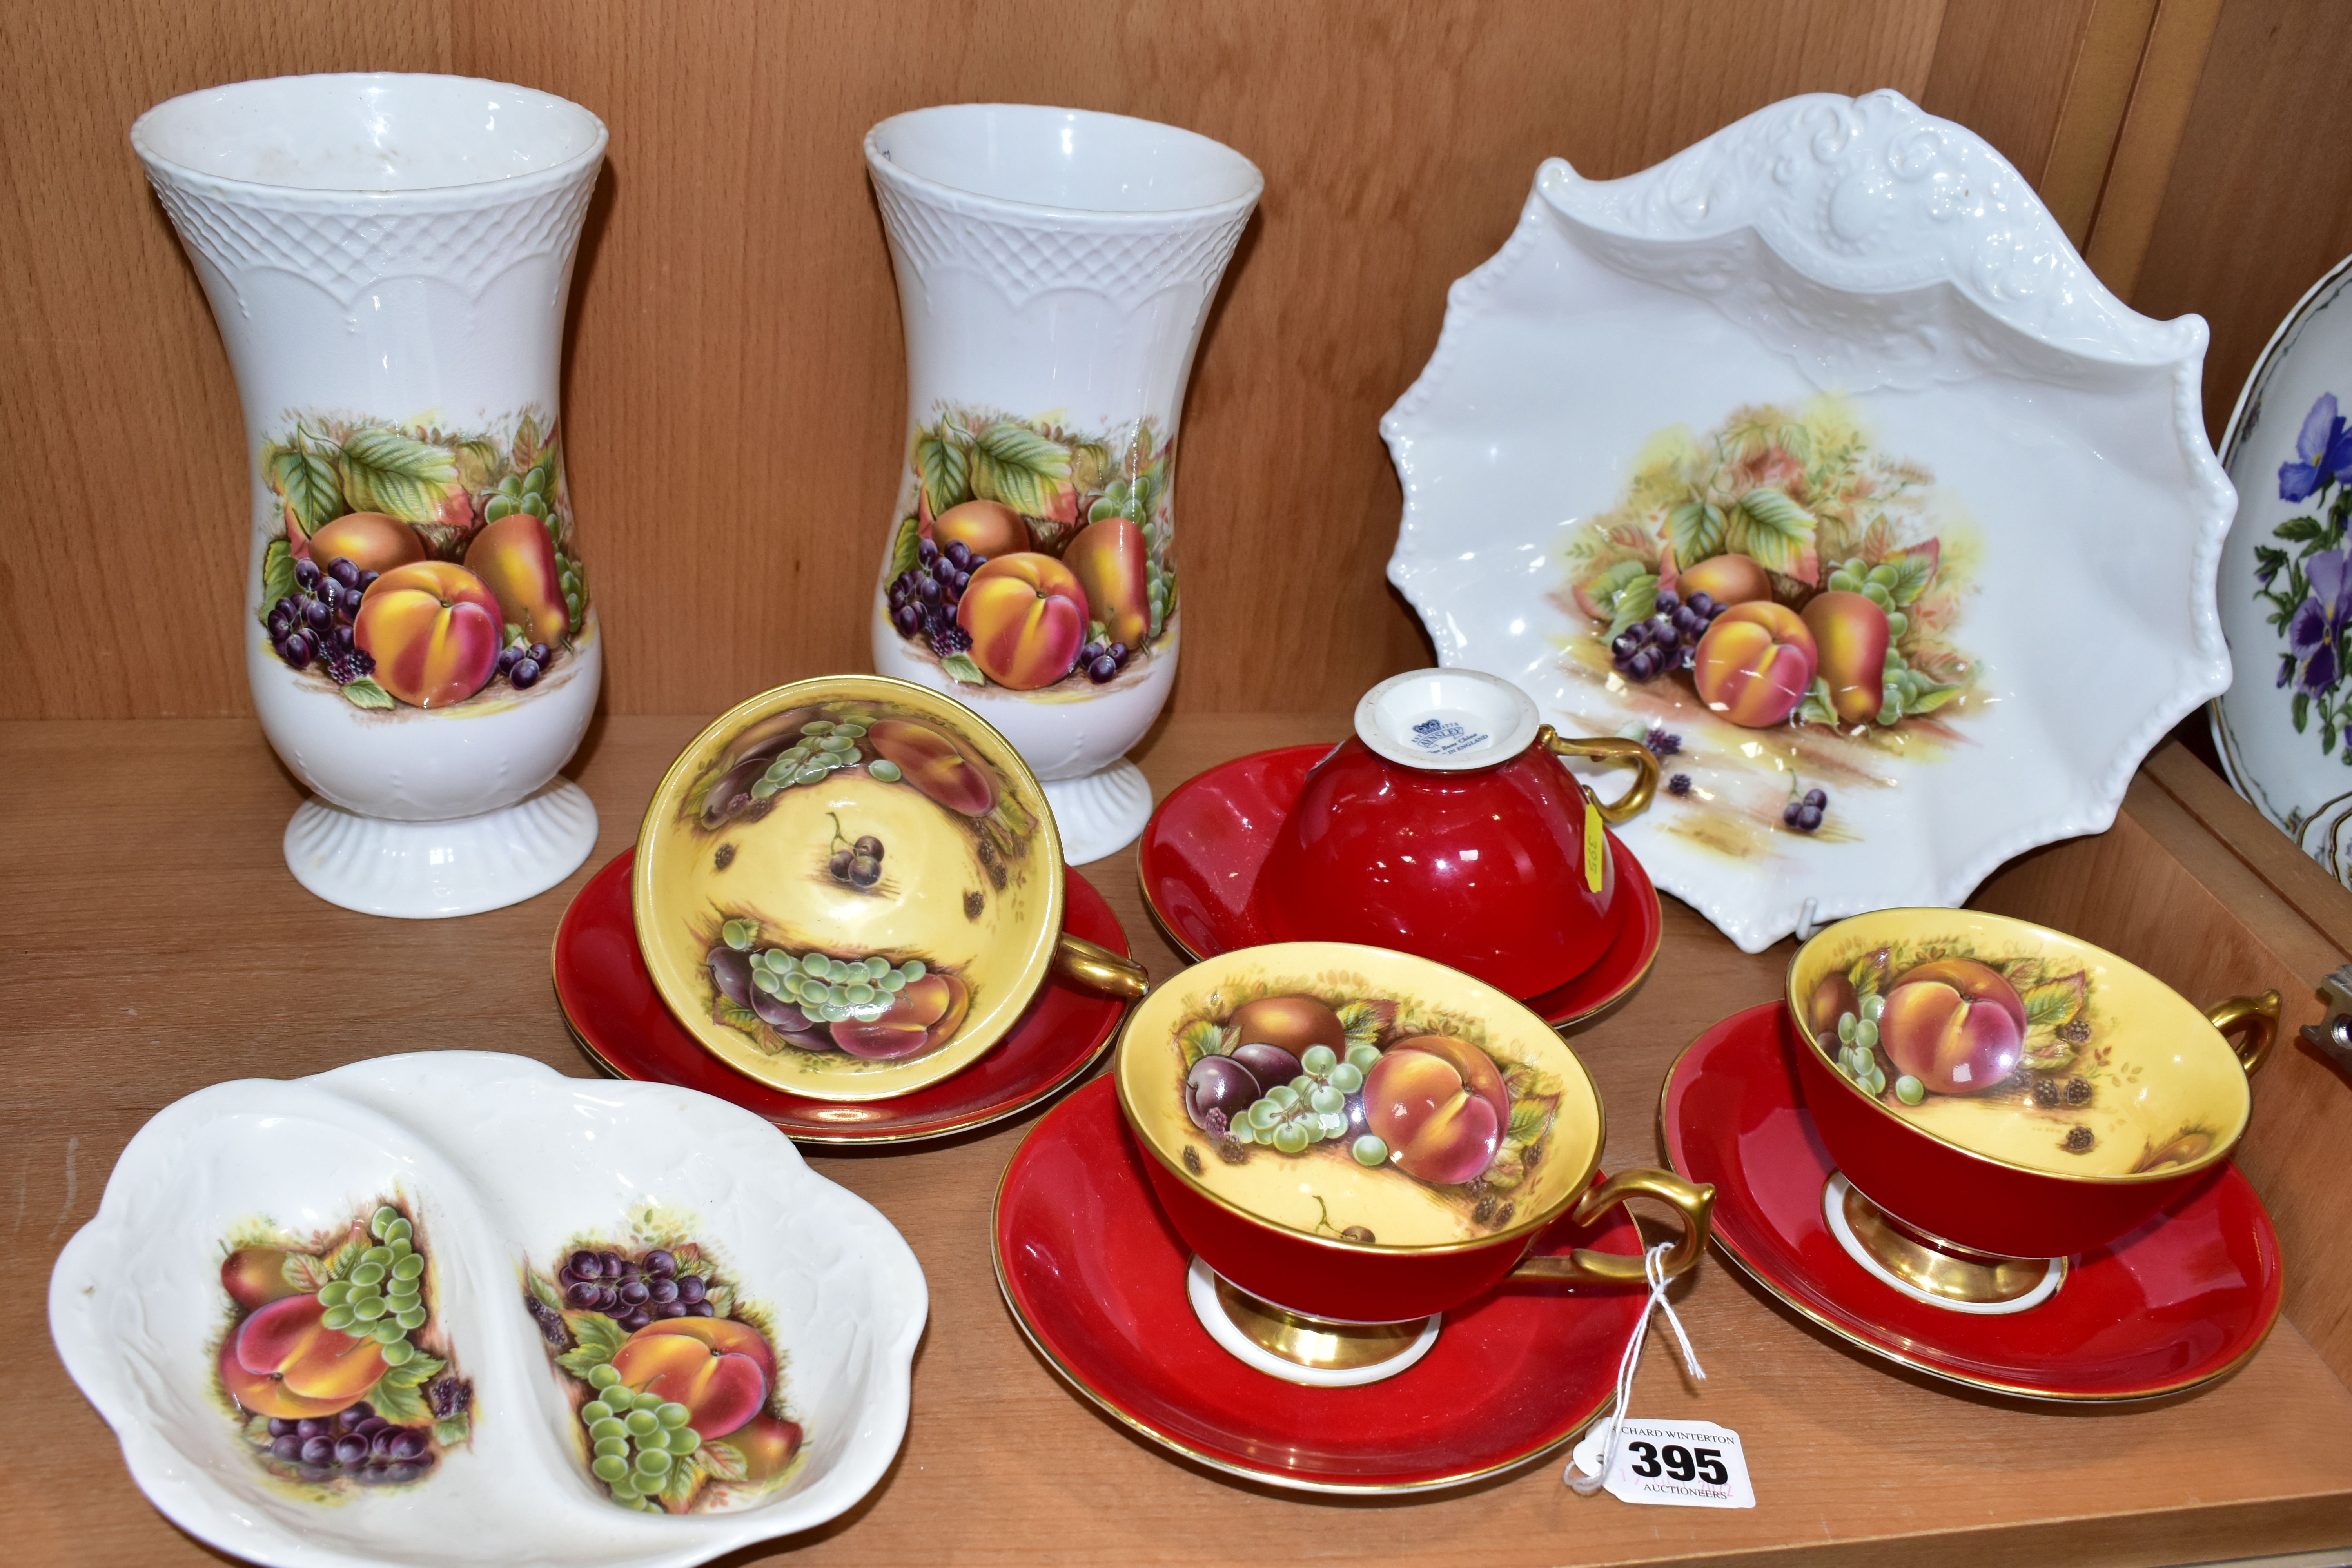 A GROUP OF AYNSLEY ORCHARD GOLD TEA AND GIFT WARES, comprising four cabinet cups and saucers, the